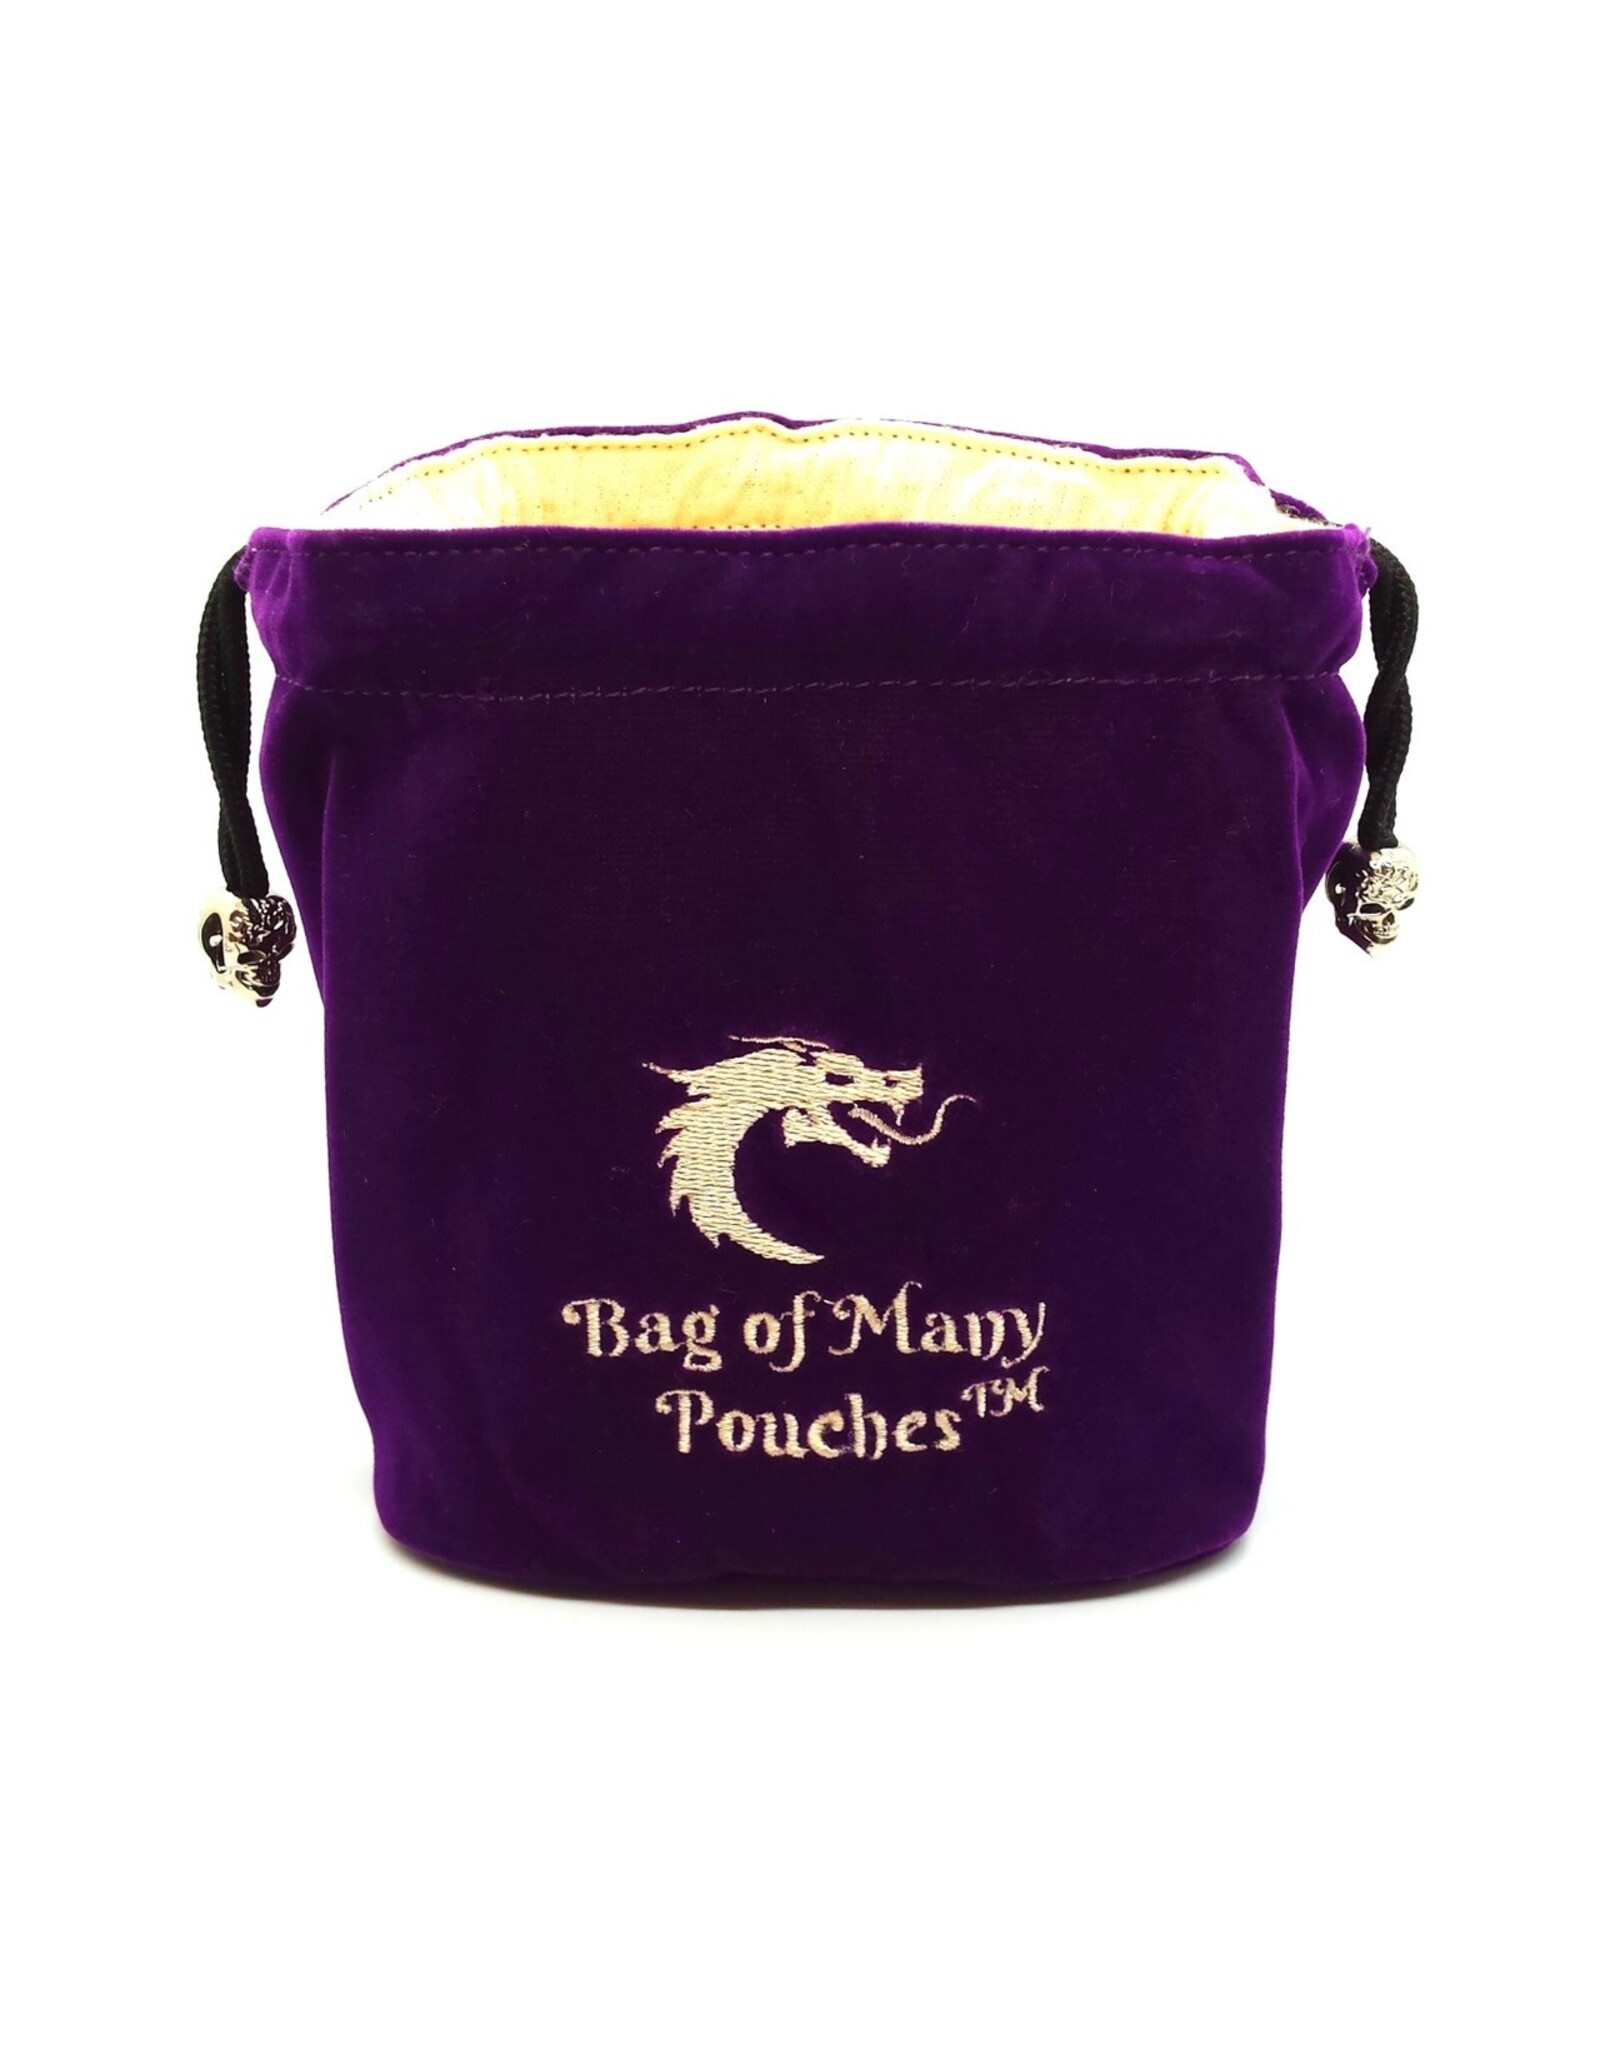 Old School Dice Bag of Many Pouches RPG DnD Dice Bag: Purple